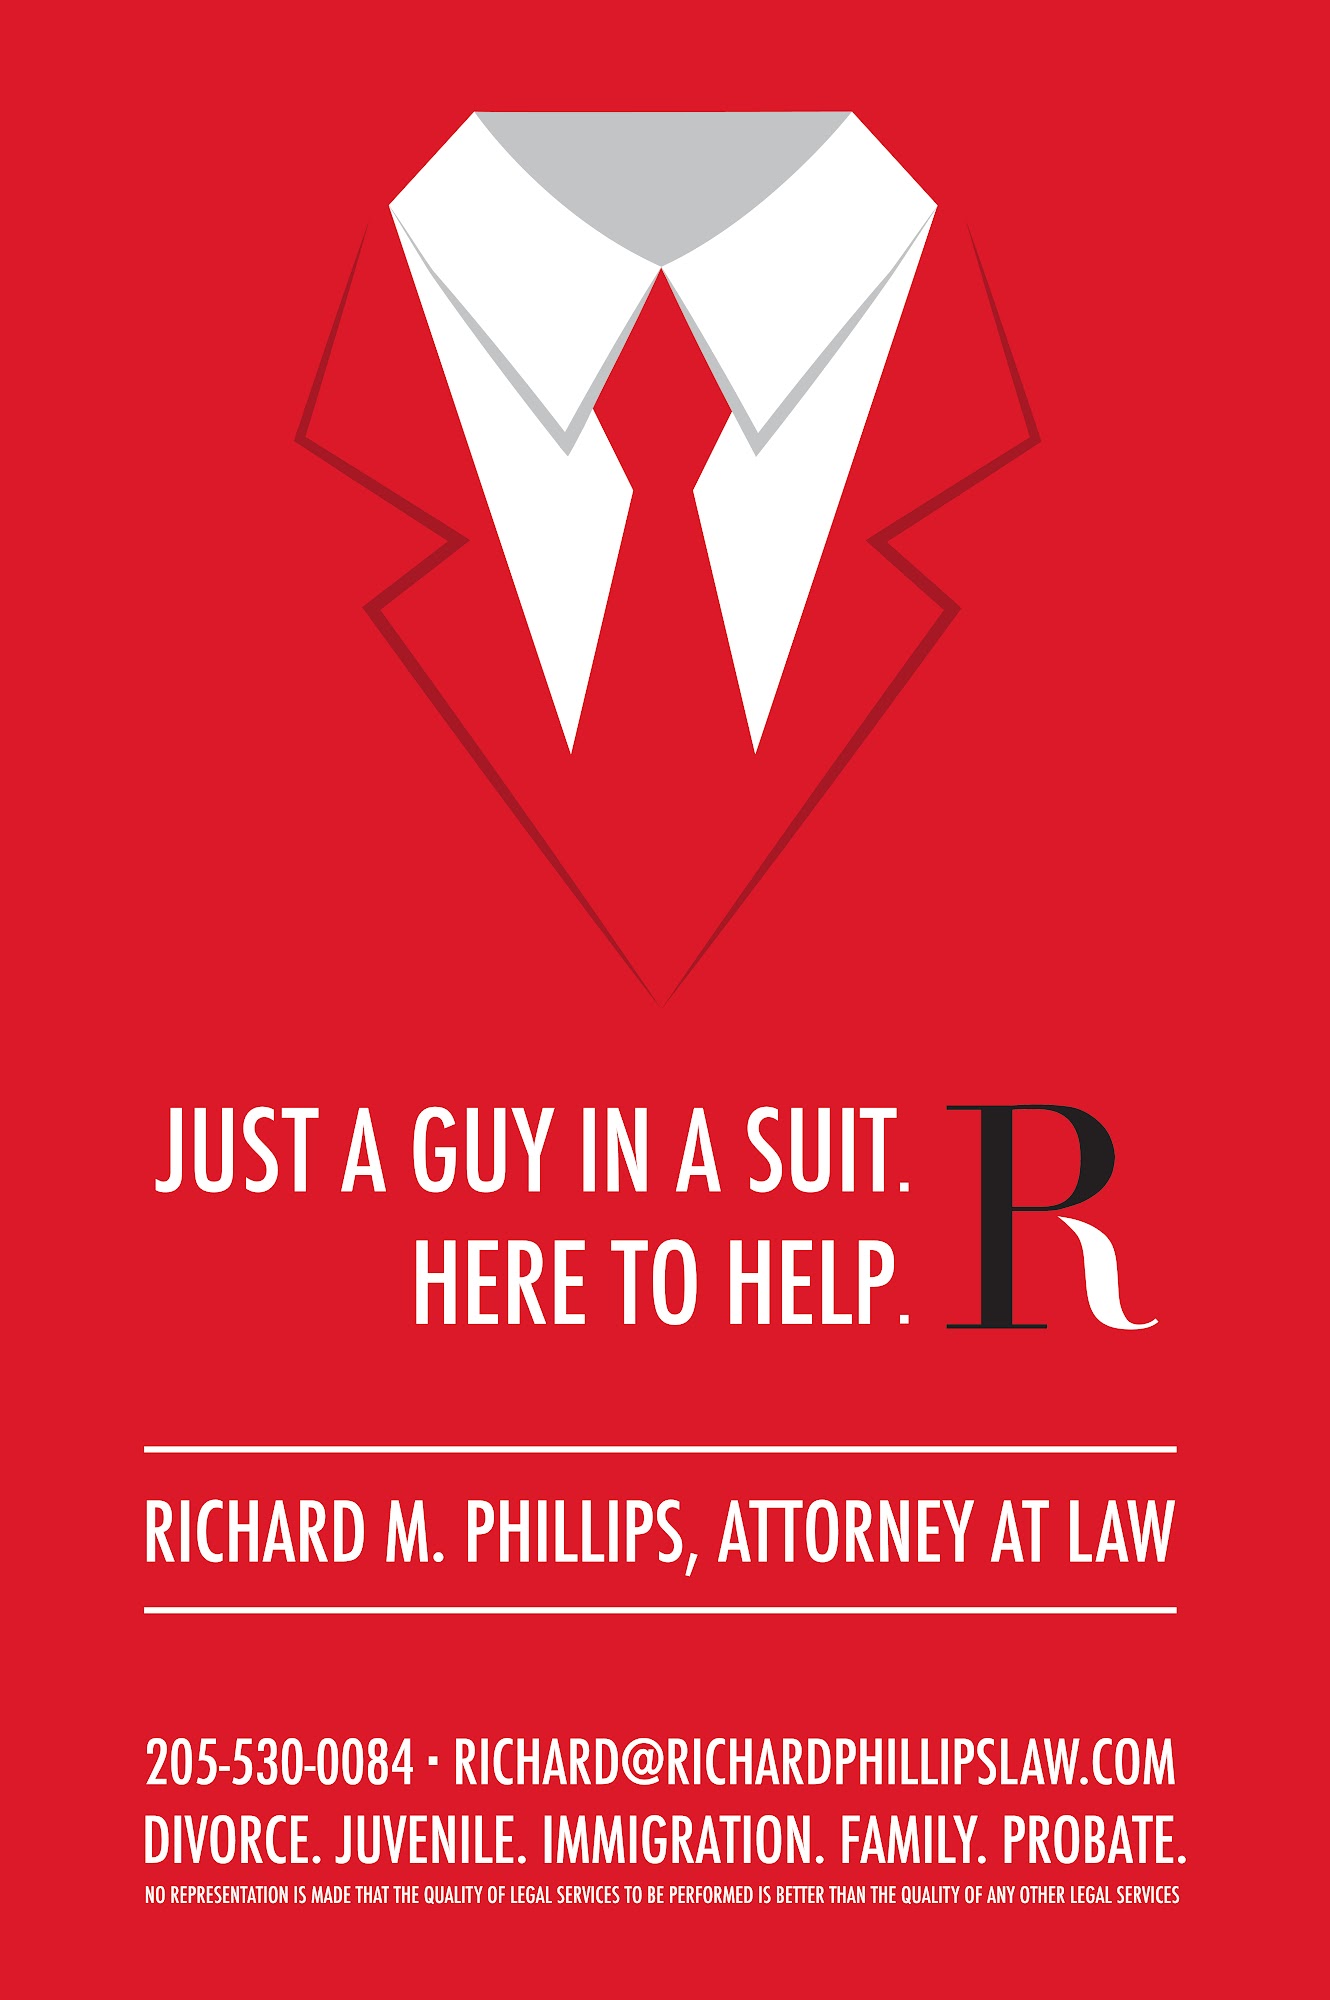 Richard M. Phillips, Attorney at Law 225 2nd Ave E, Oneonta Alabama 35121